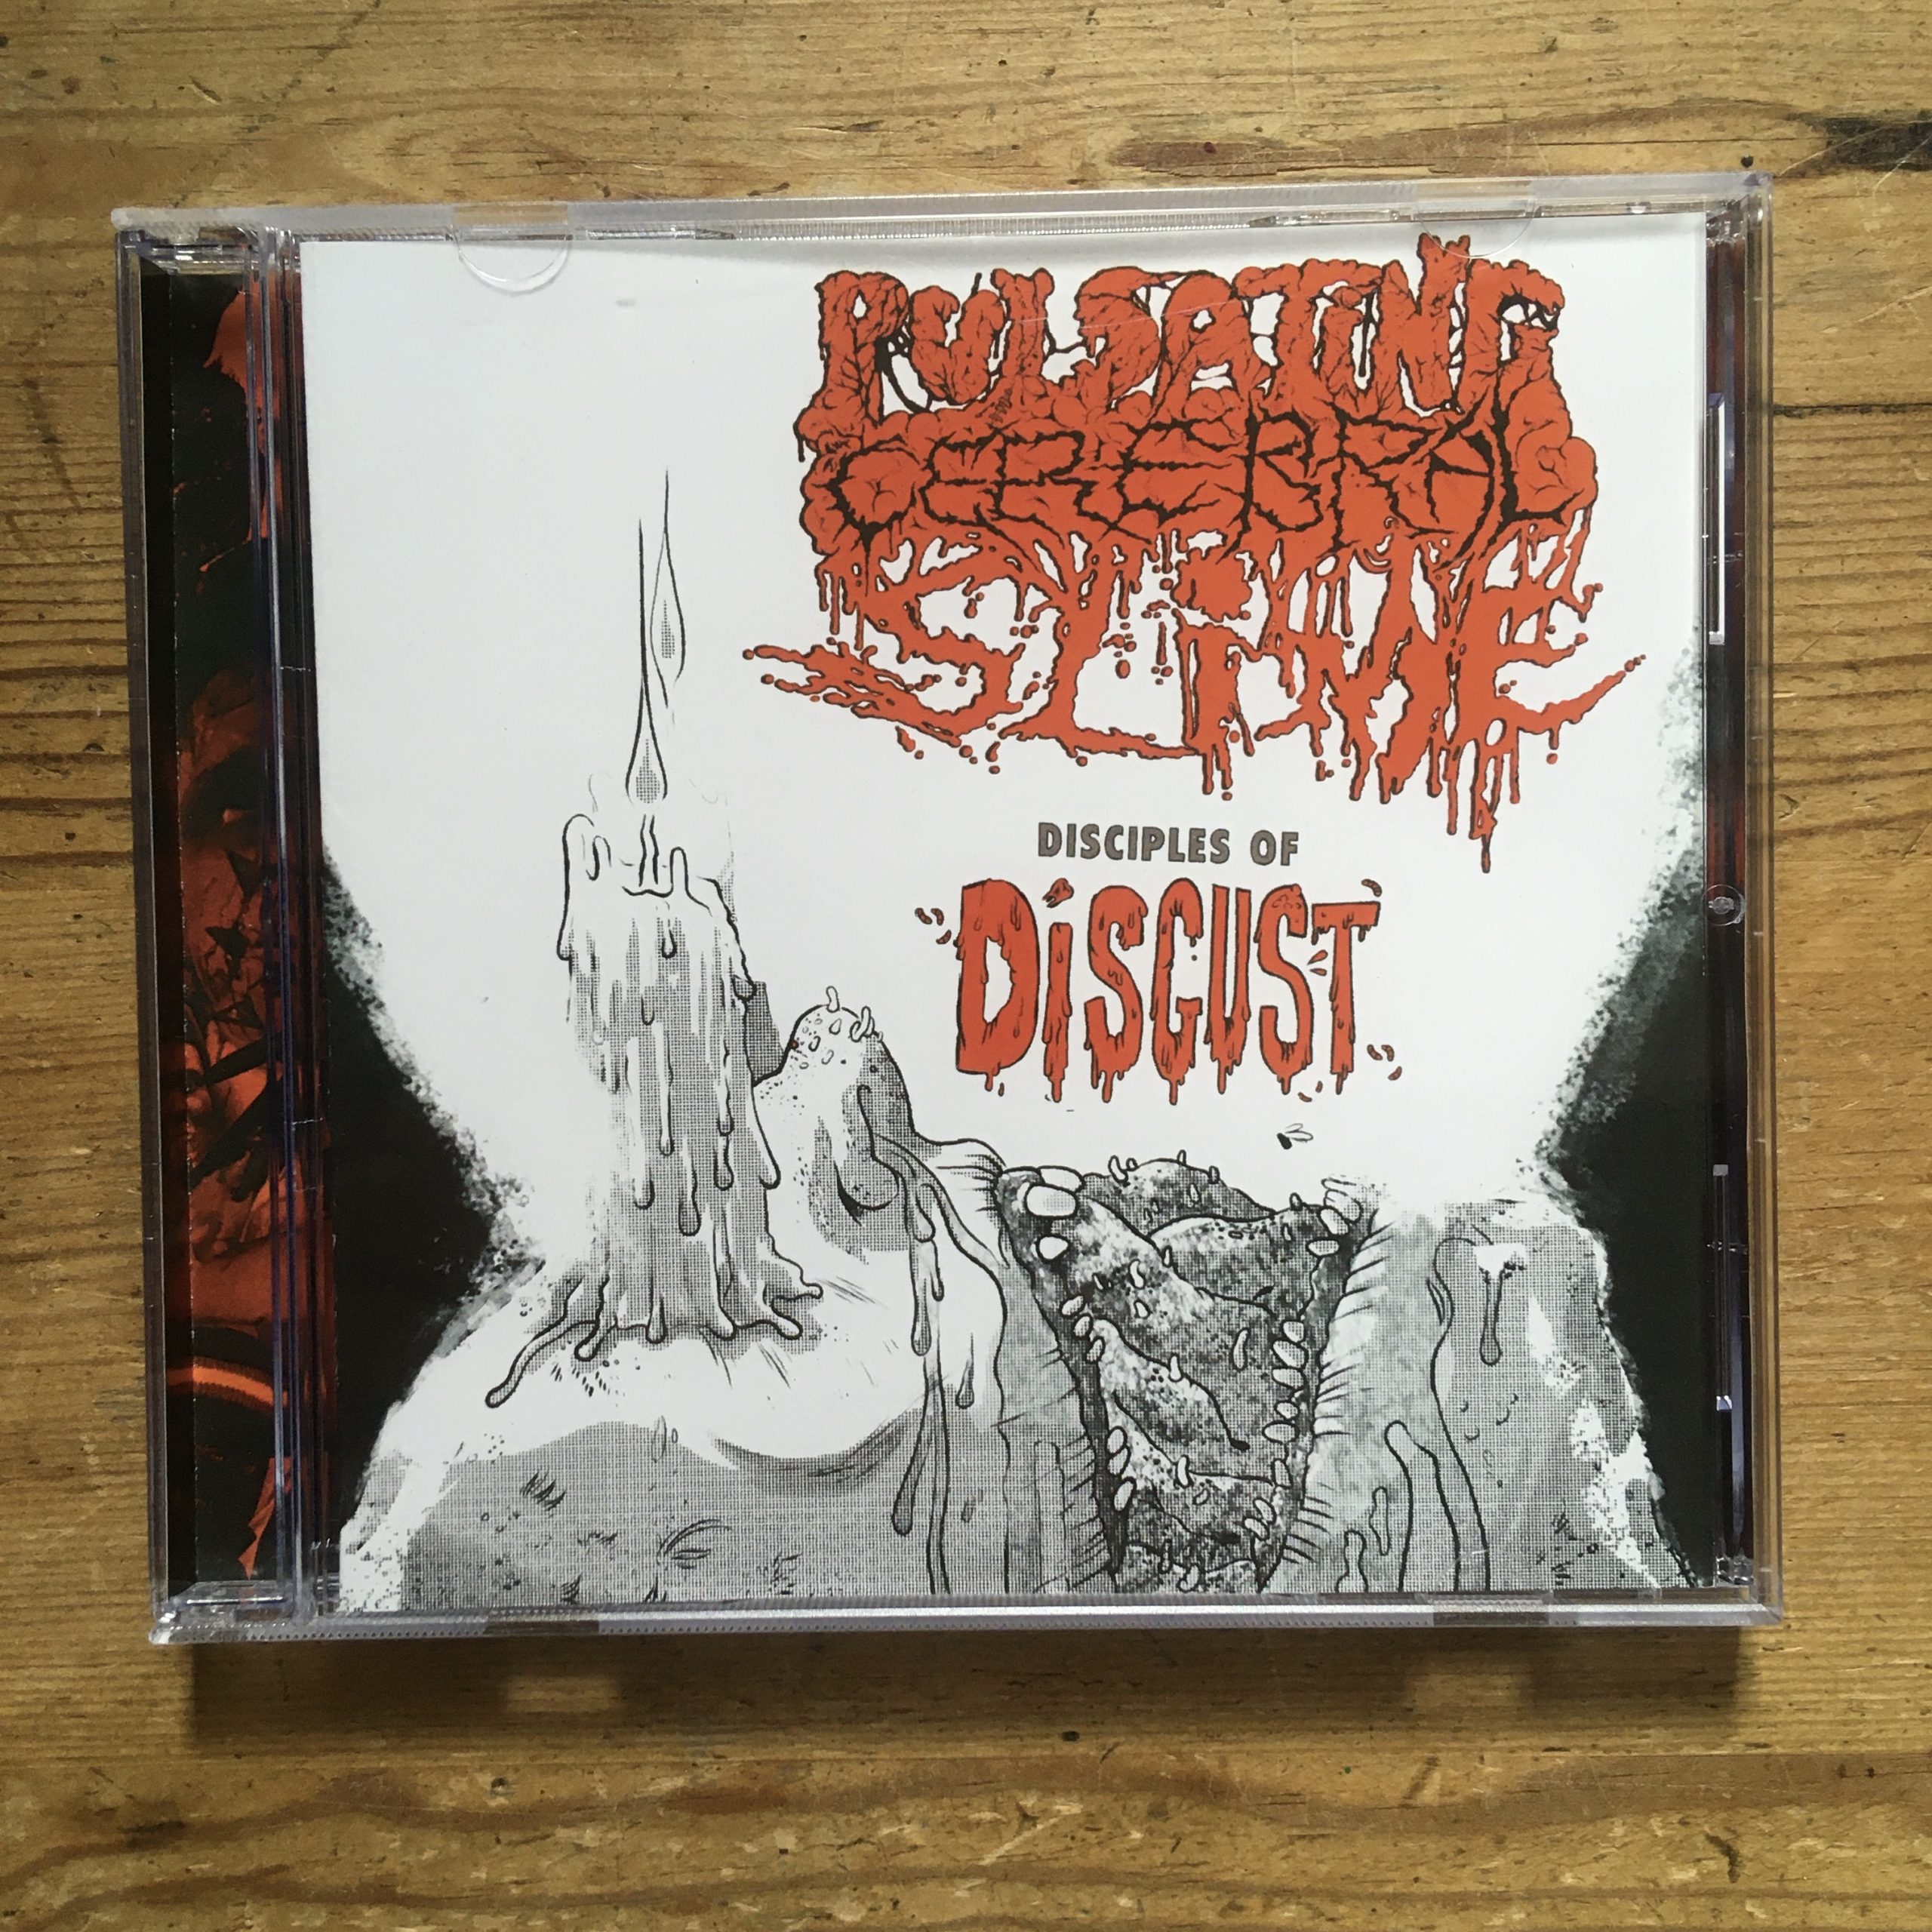 Photo of the Pulsating Cerebral Slime - "Disciples of Disgust" CD